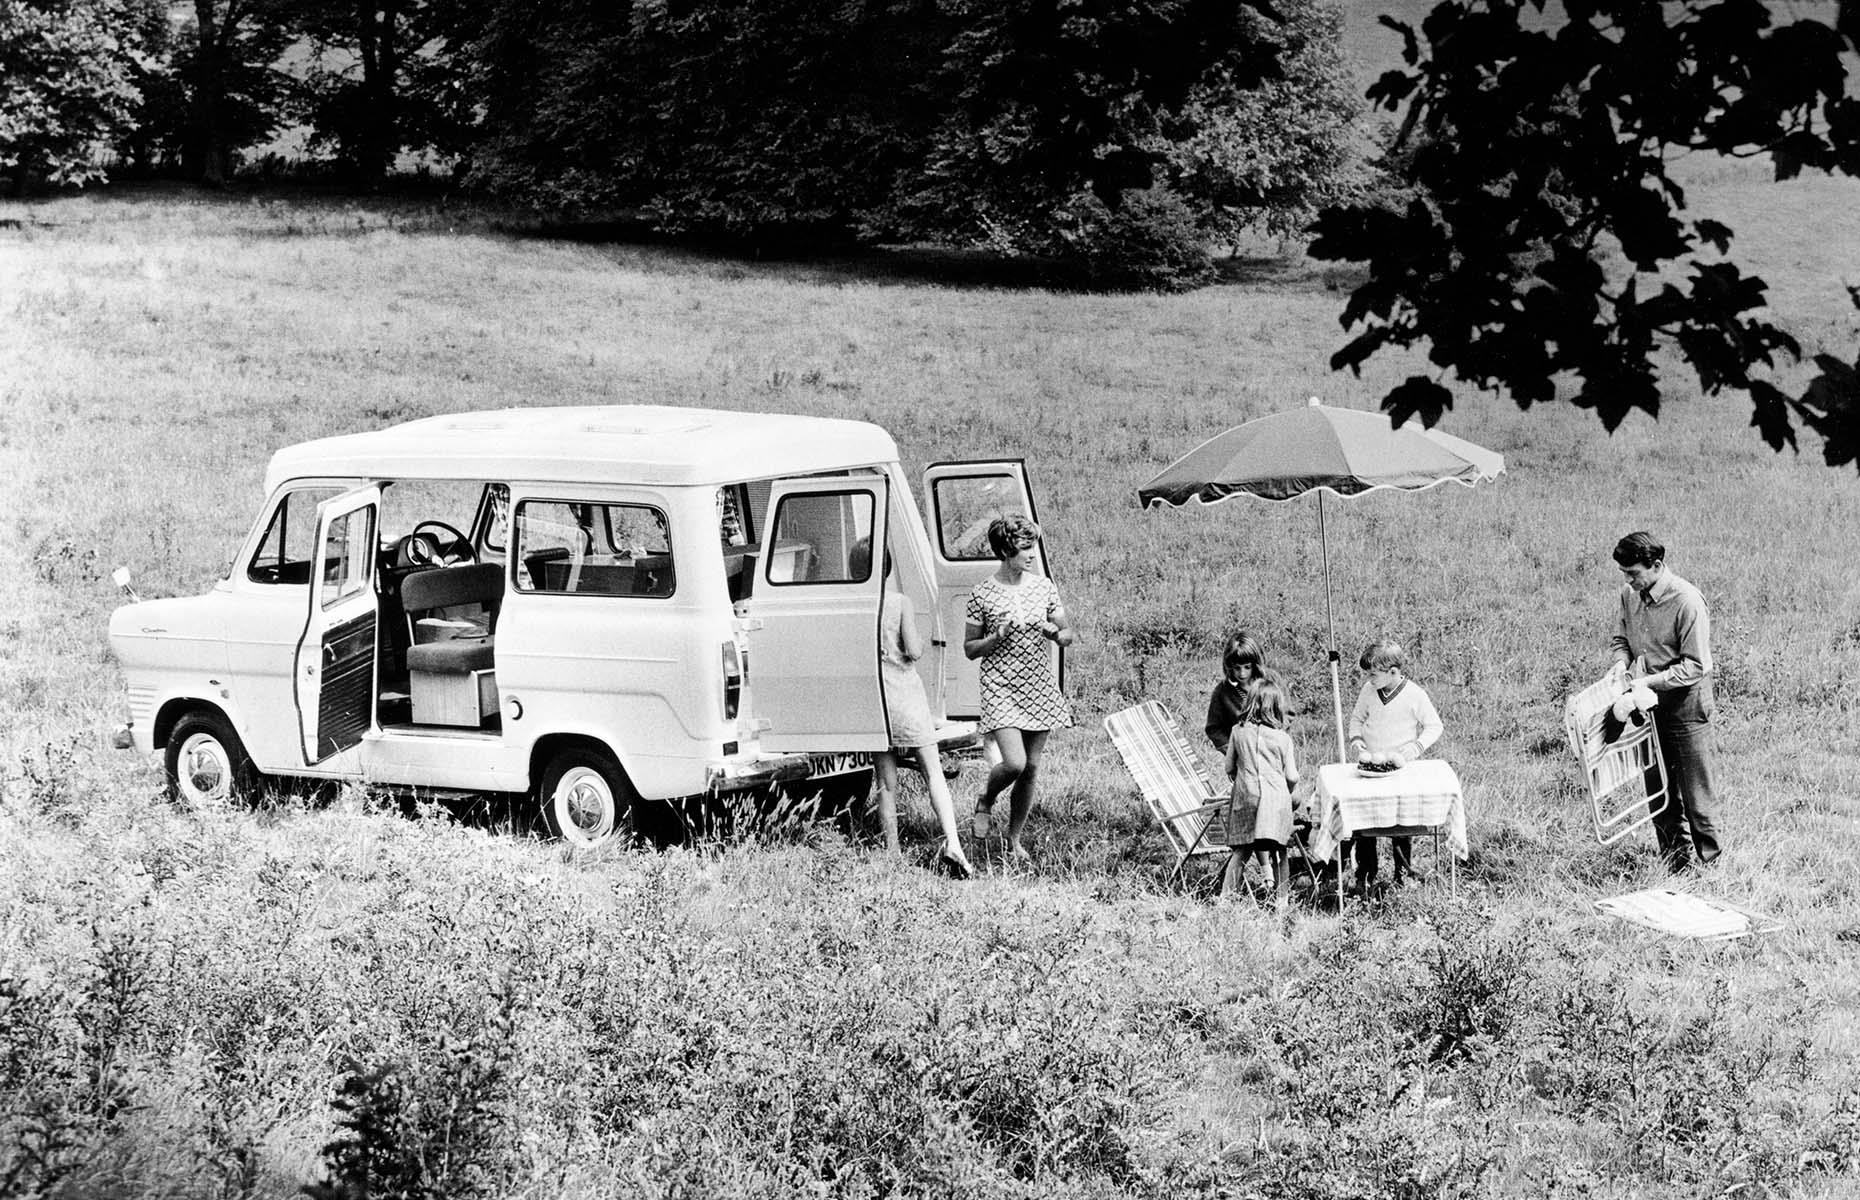 However, some people still eschewed organized campgrounds in favor of parking up in their own peaceful pocket of America. This idyllic scene shows a family with a converted Ford Explorer camper van setting up for a picnic in a quiet meadow.